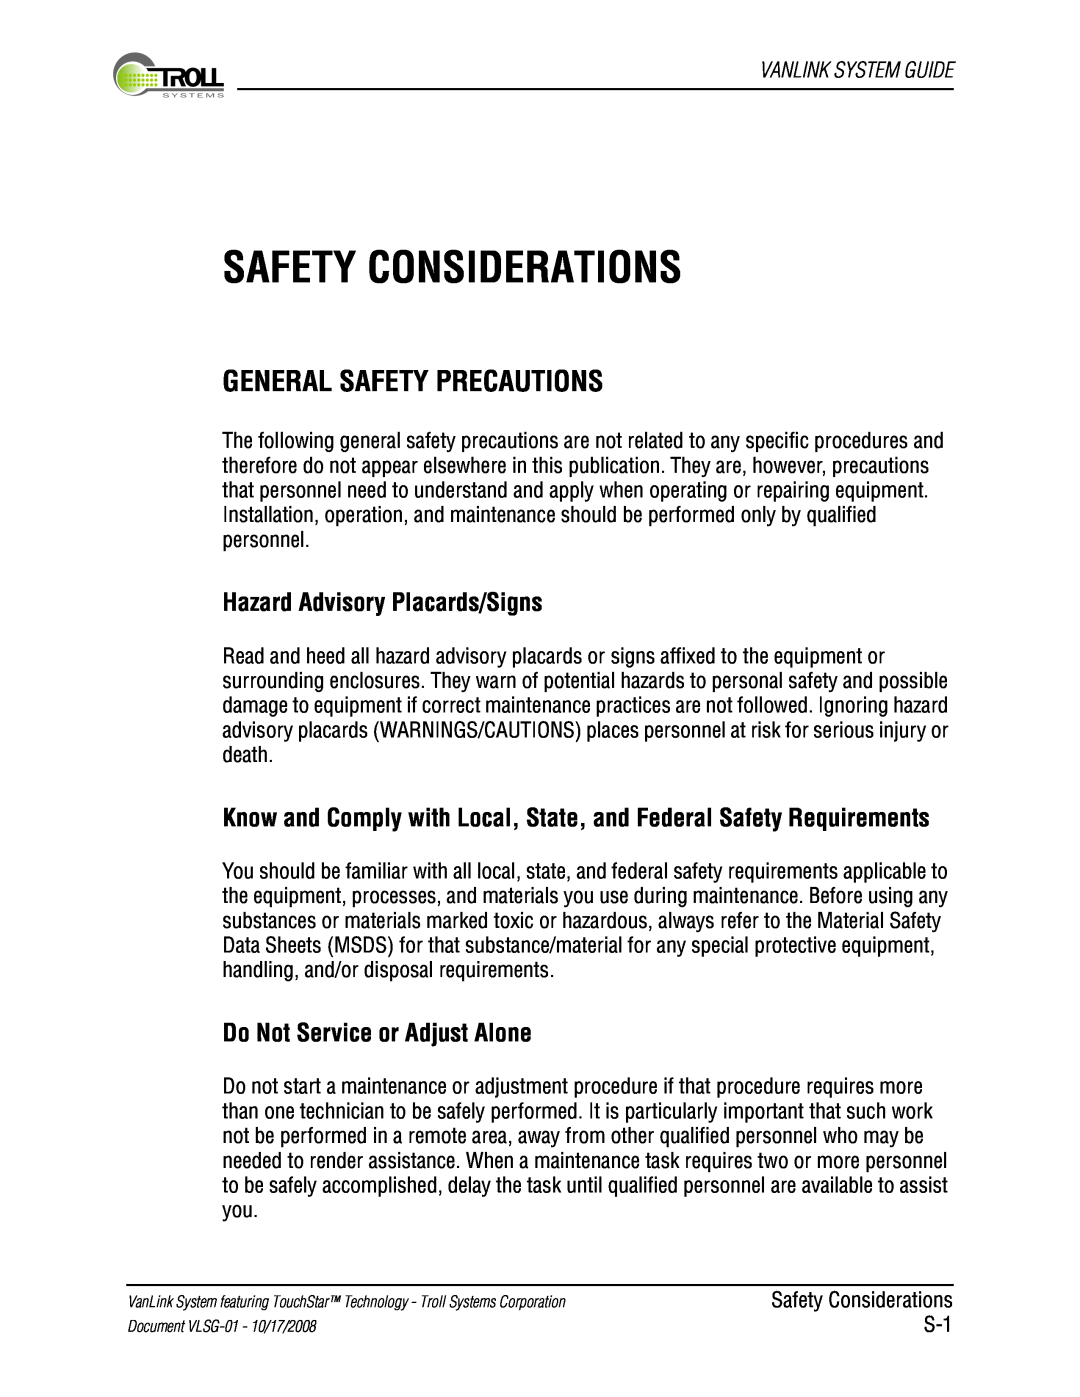 Kyocera VLSG-01 Safety Considerations, General Safety Precautions, Hazard Advisory Placards/Signs, Vanlink System Guide 